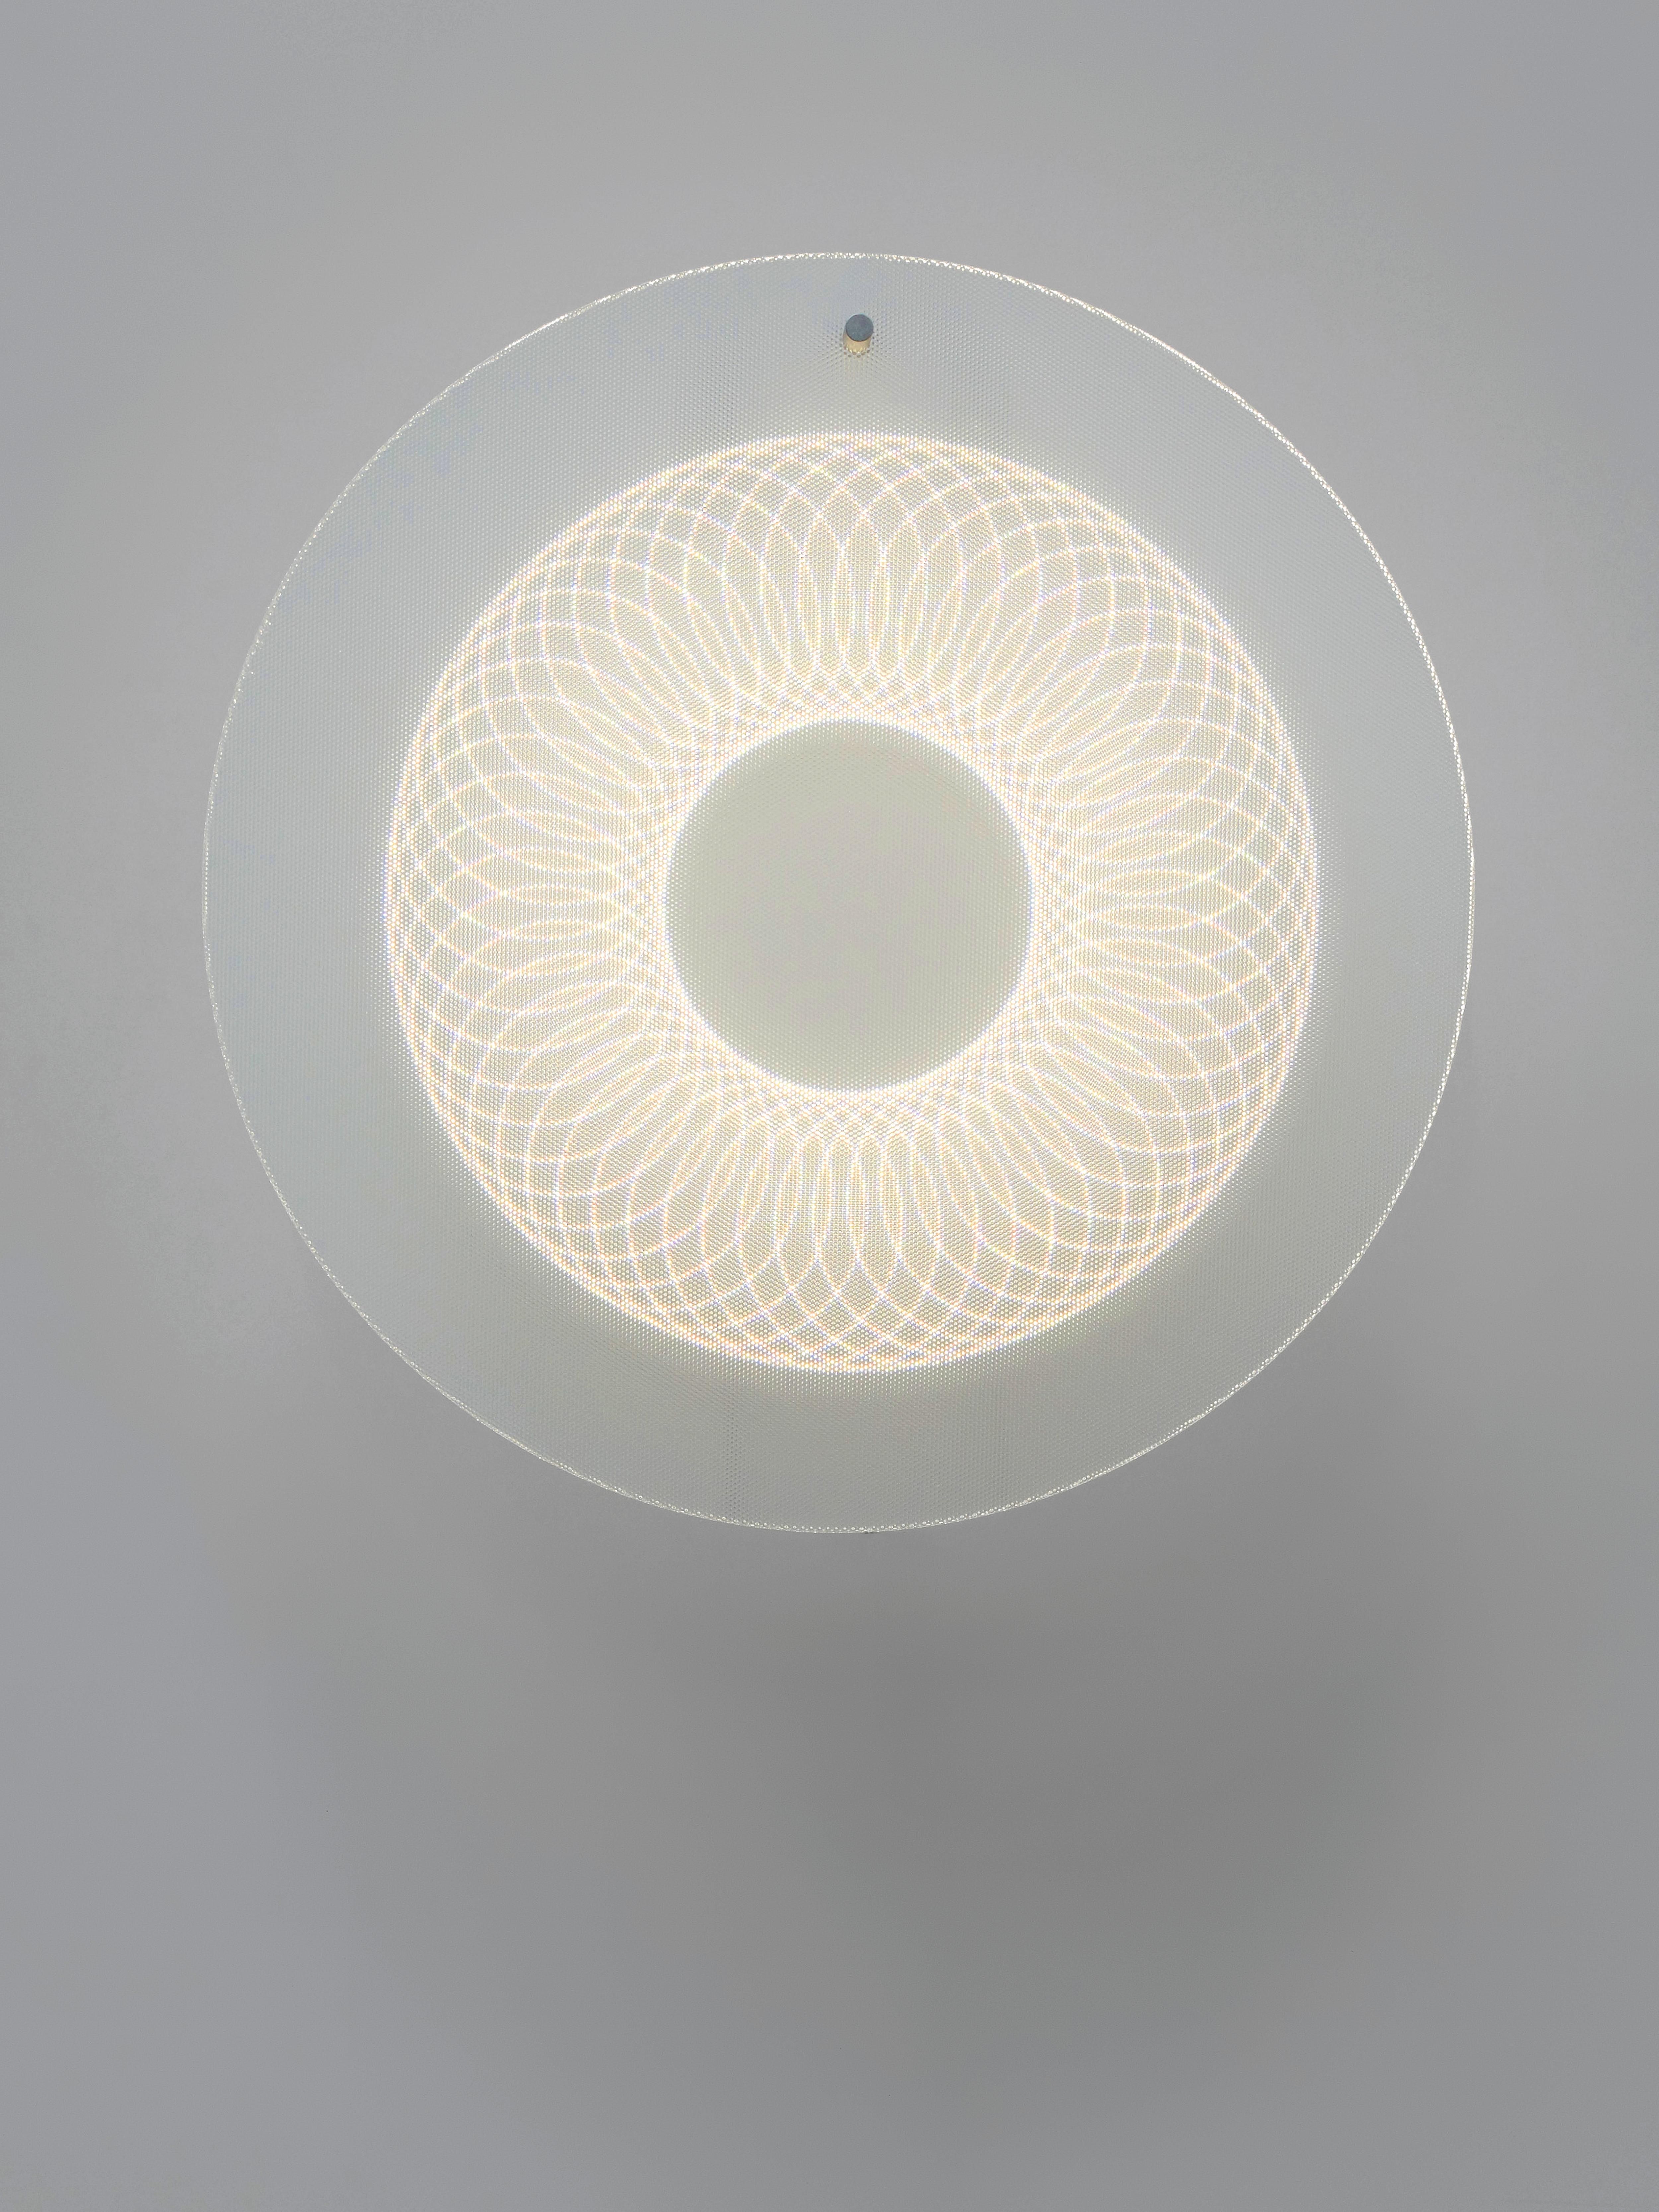 Every lamp encapsulates a shape of light that changes depending on your position in space. Faced head on you see a geometrical pattern, but seen from an angle the shape distorts and its depth accelerates. The led points function not only as a source